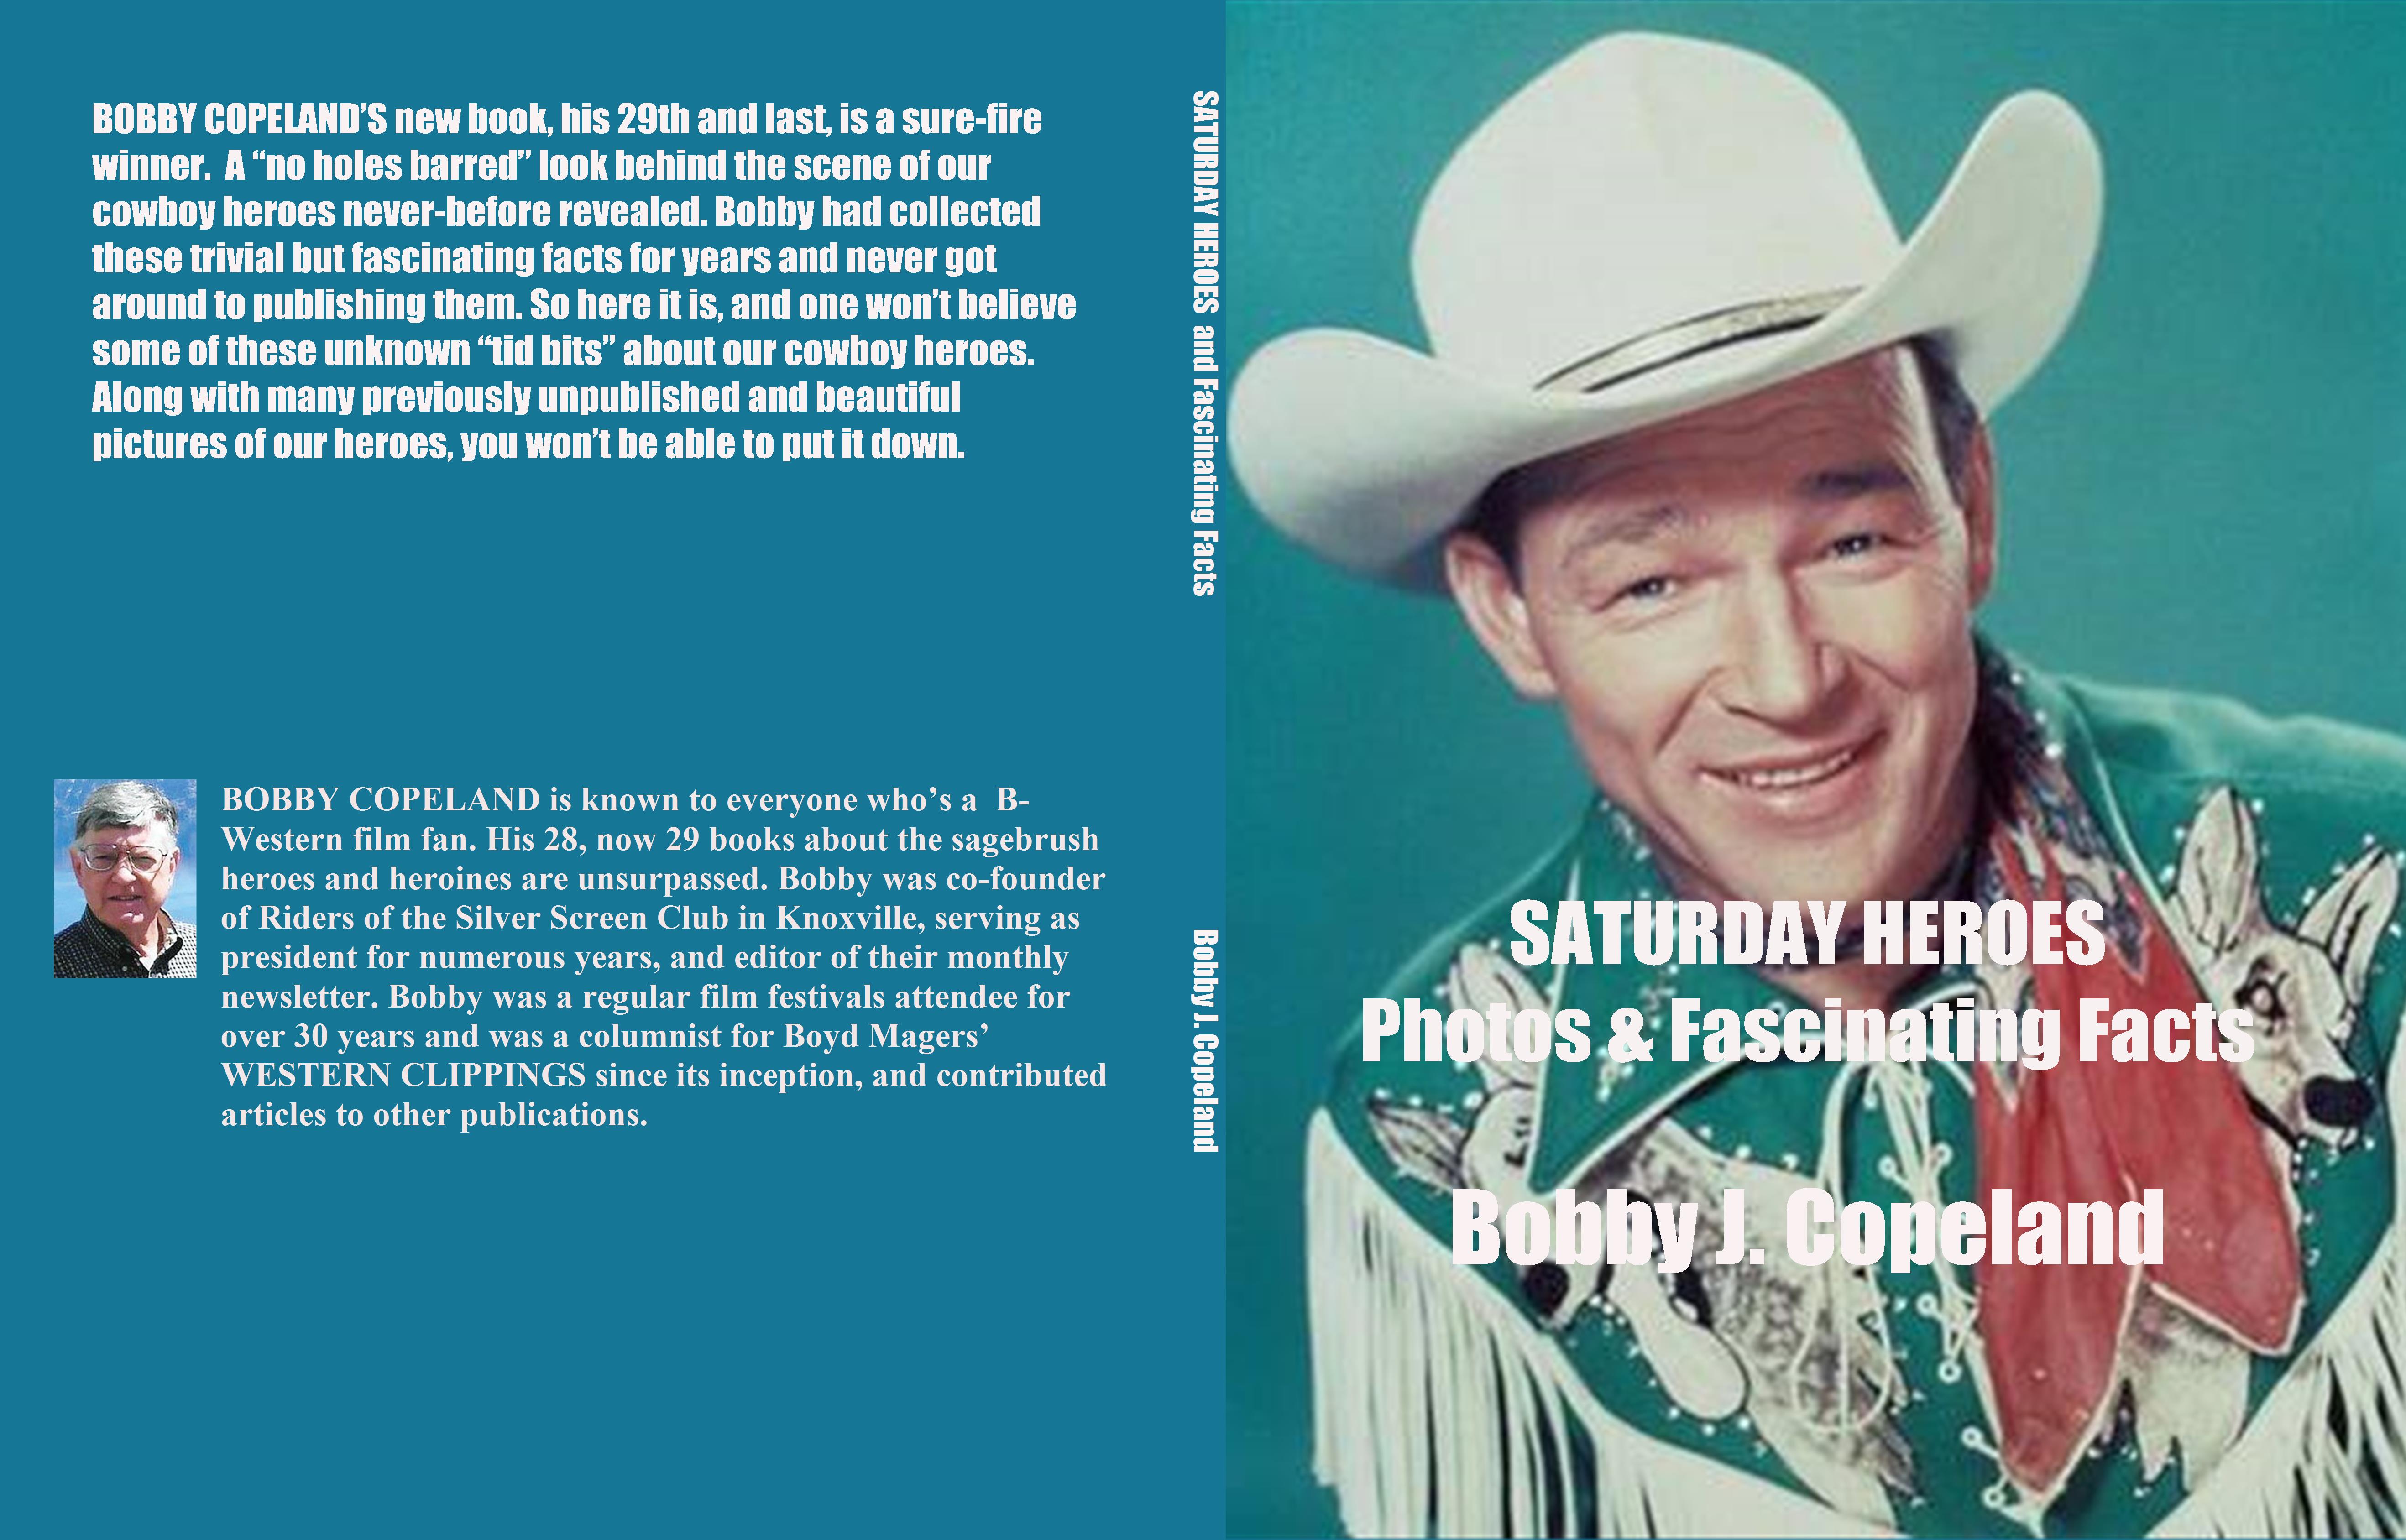 SATURDAY HEROES Photos & Fascinating Facts cover image